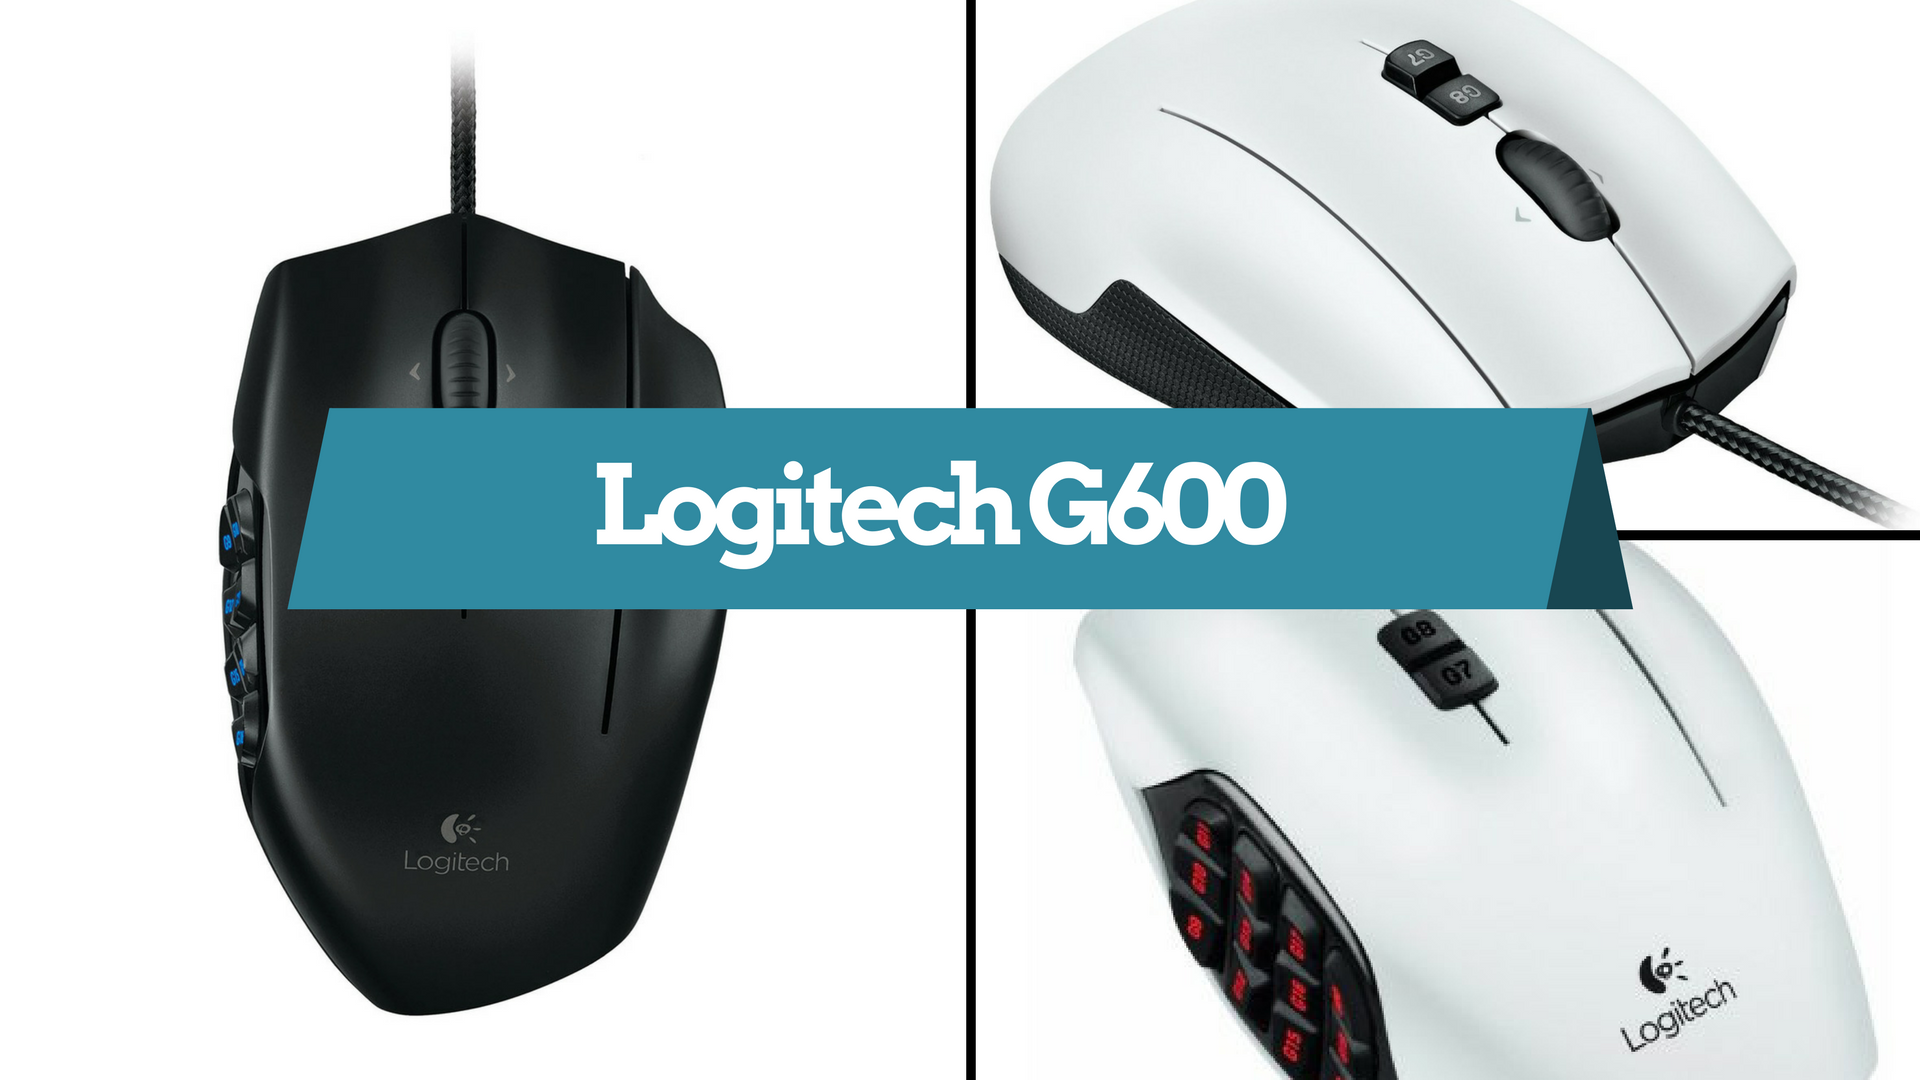 Logitech G600 Gaming Mouse Review & Specifications